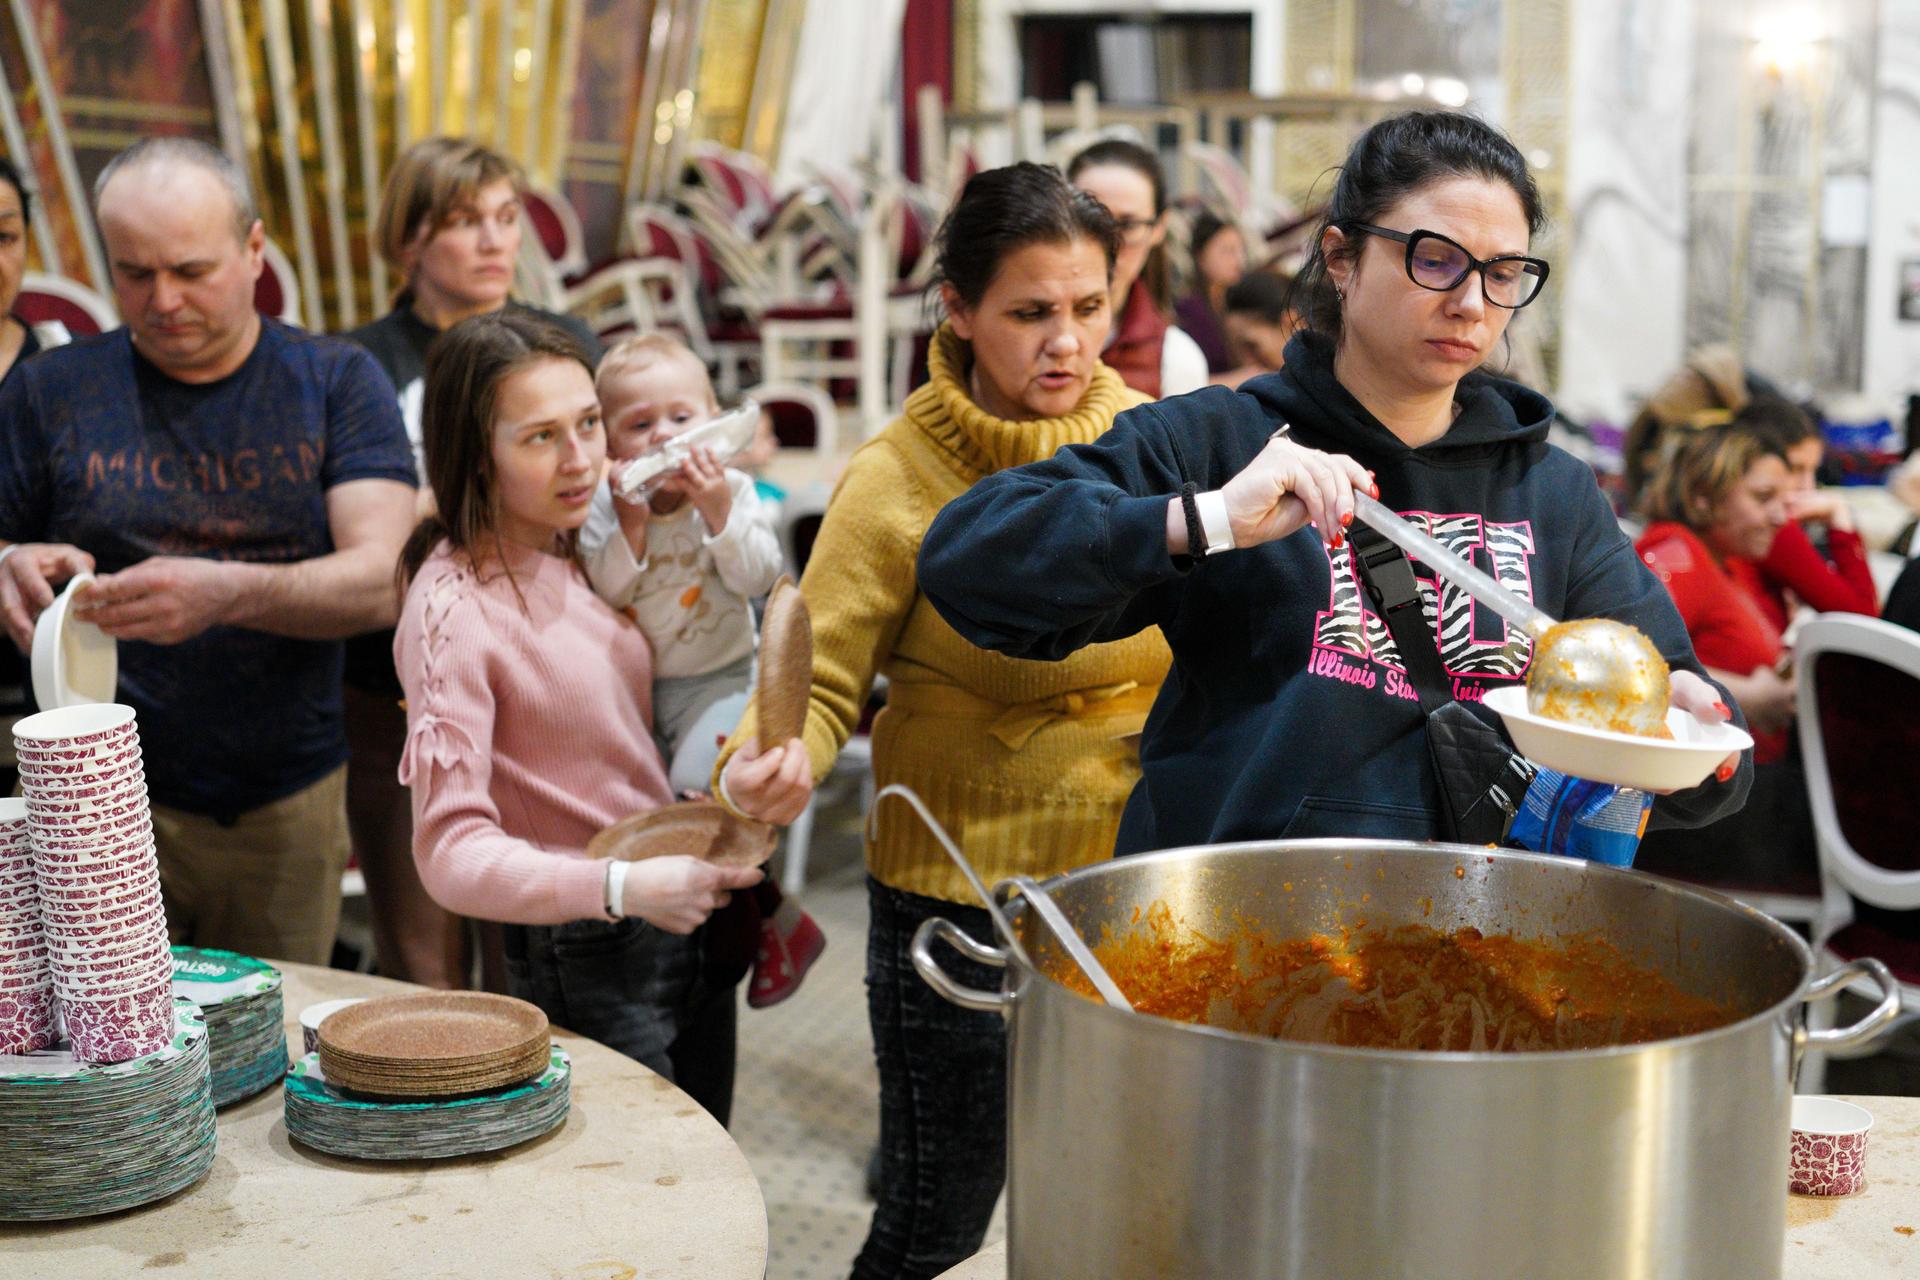 In the town of Suceava, Romania, the Mandachi Hotel and Spa, a four-star hotel converted its ballroom into a temporary shelter, serving food and other supplies to Ukrainian refugees.